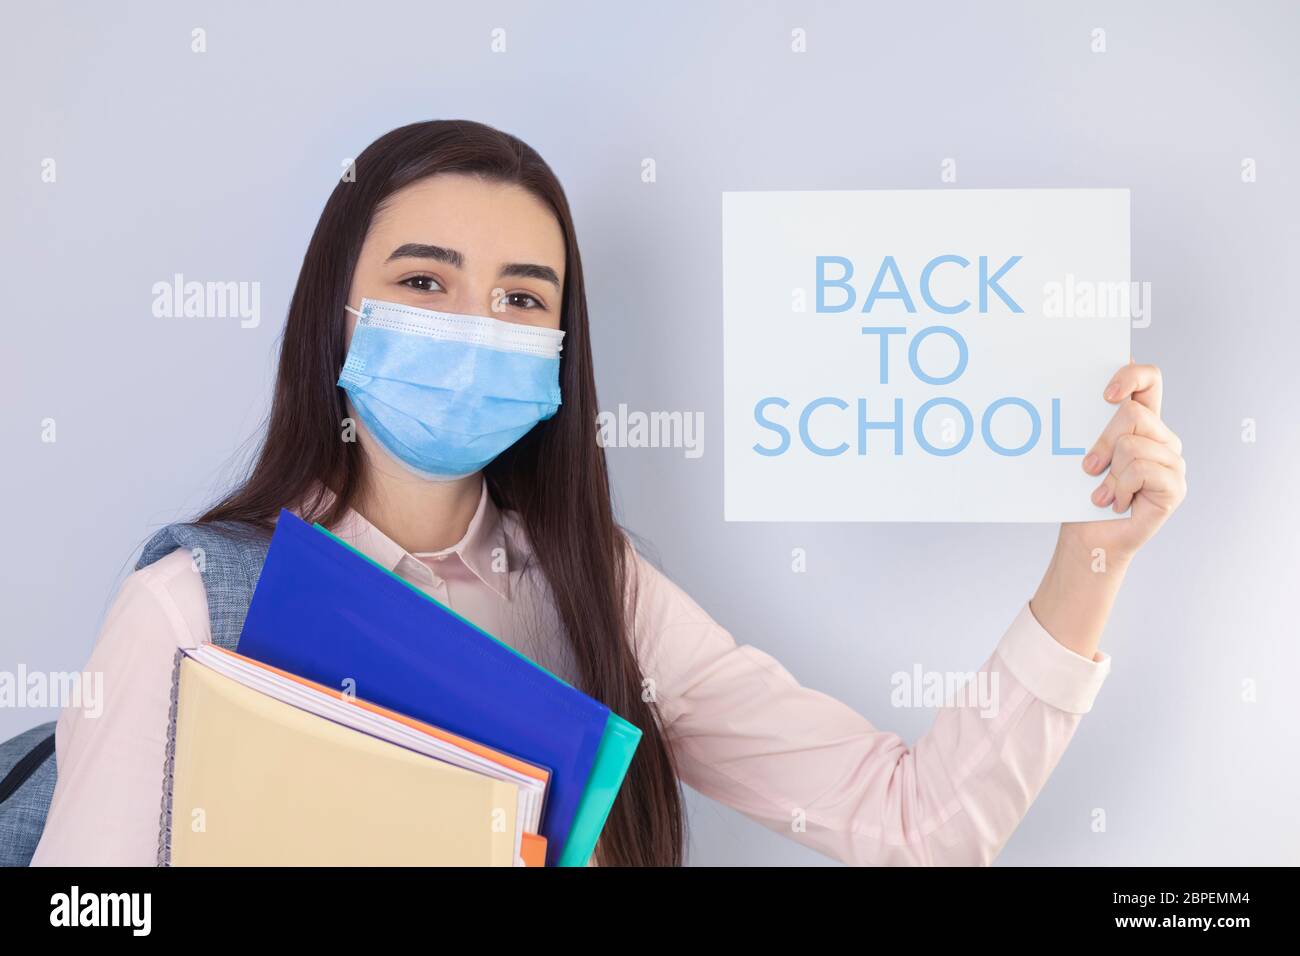 High school girl with mask on her showing back to school message. Student girl ready for school during the coronavirus pandemic. Focus on her face. Stock Photo